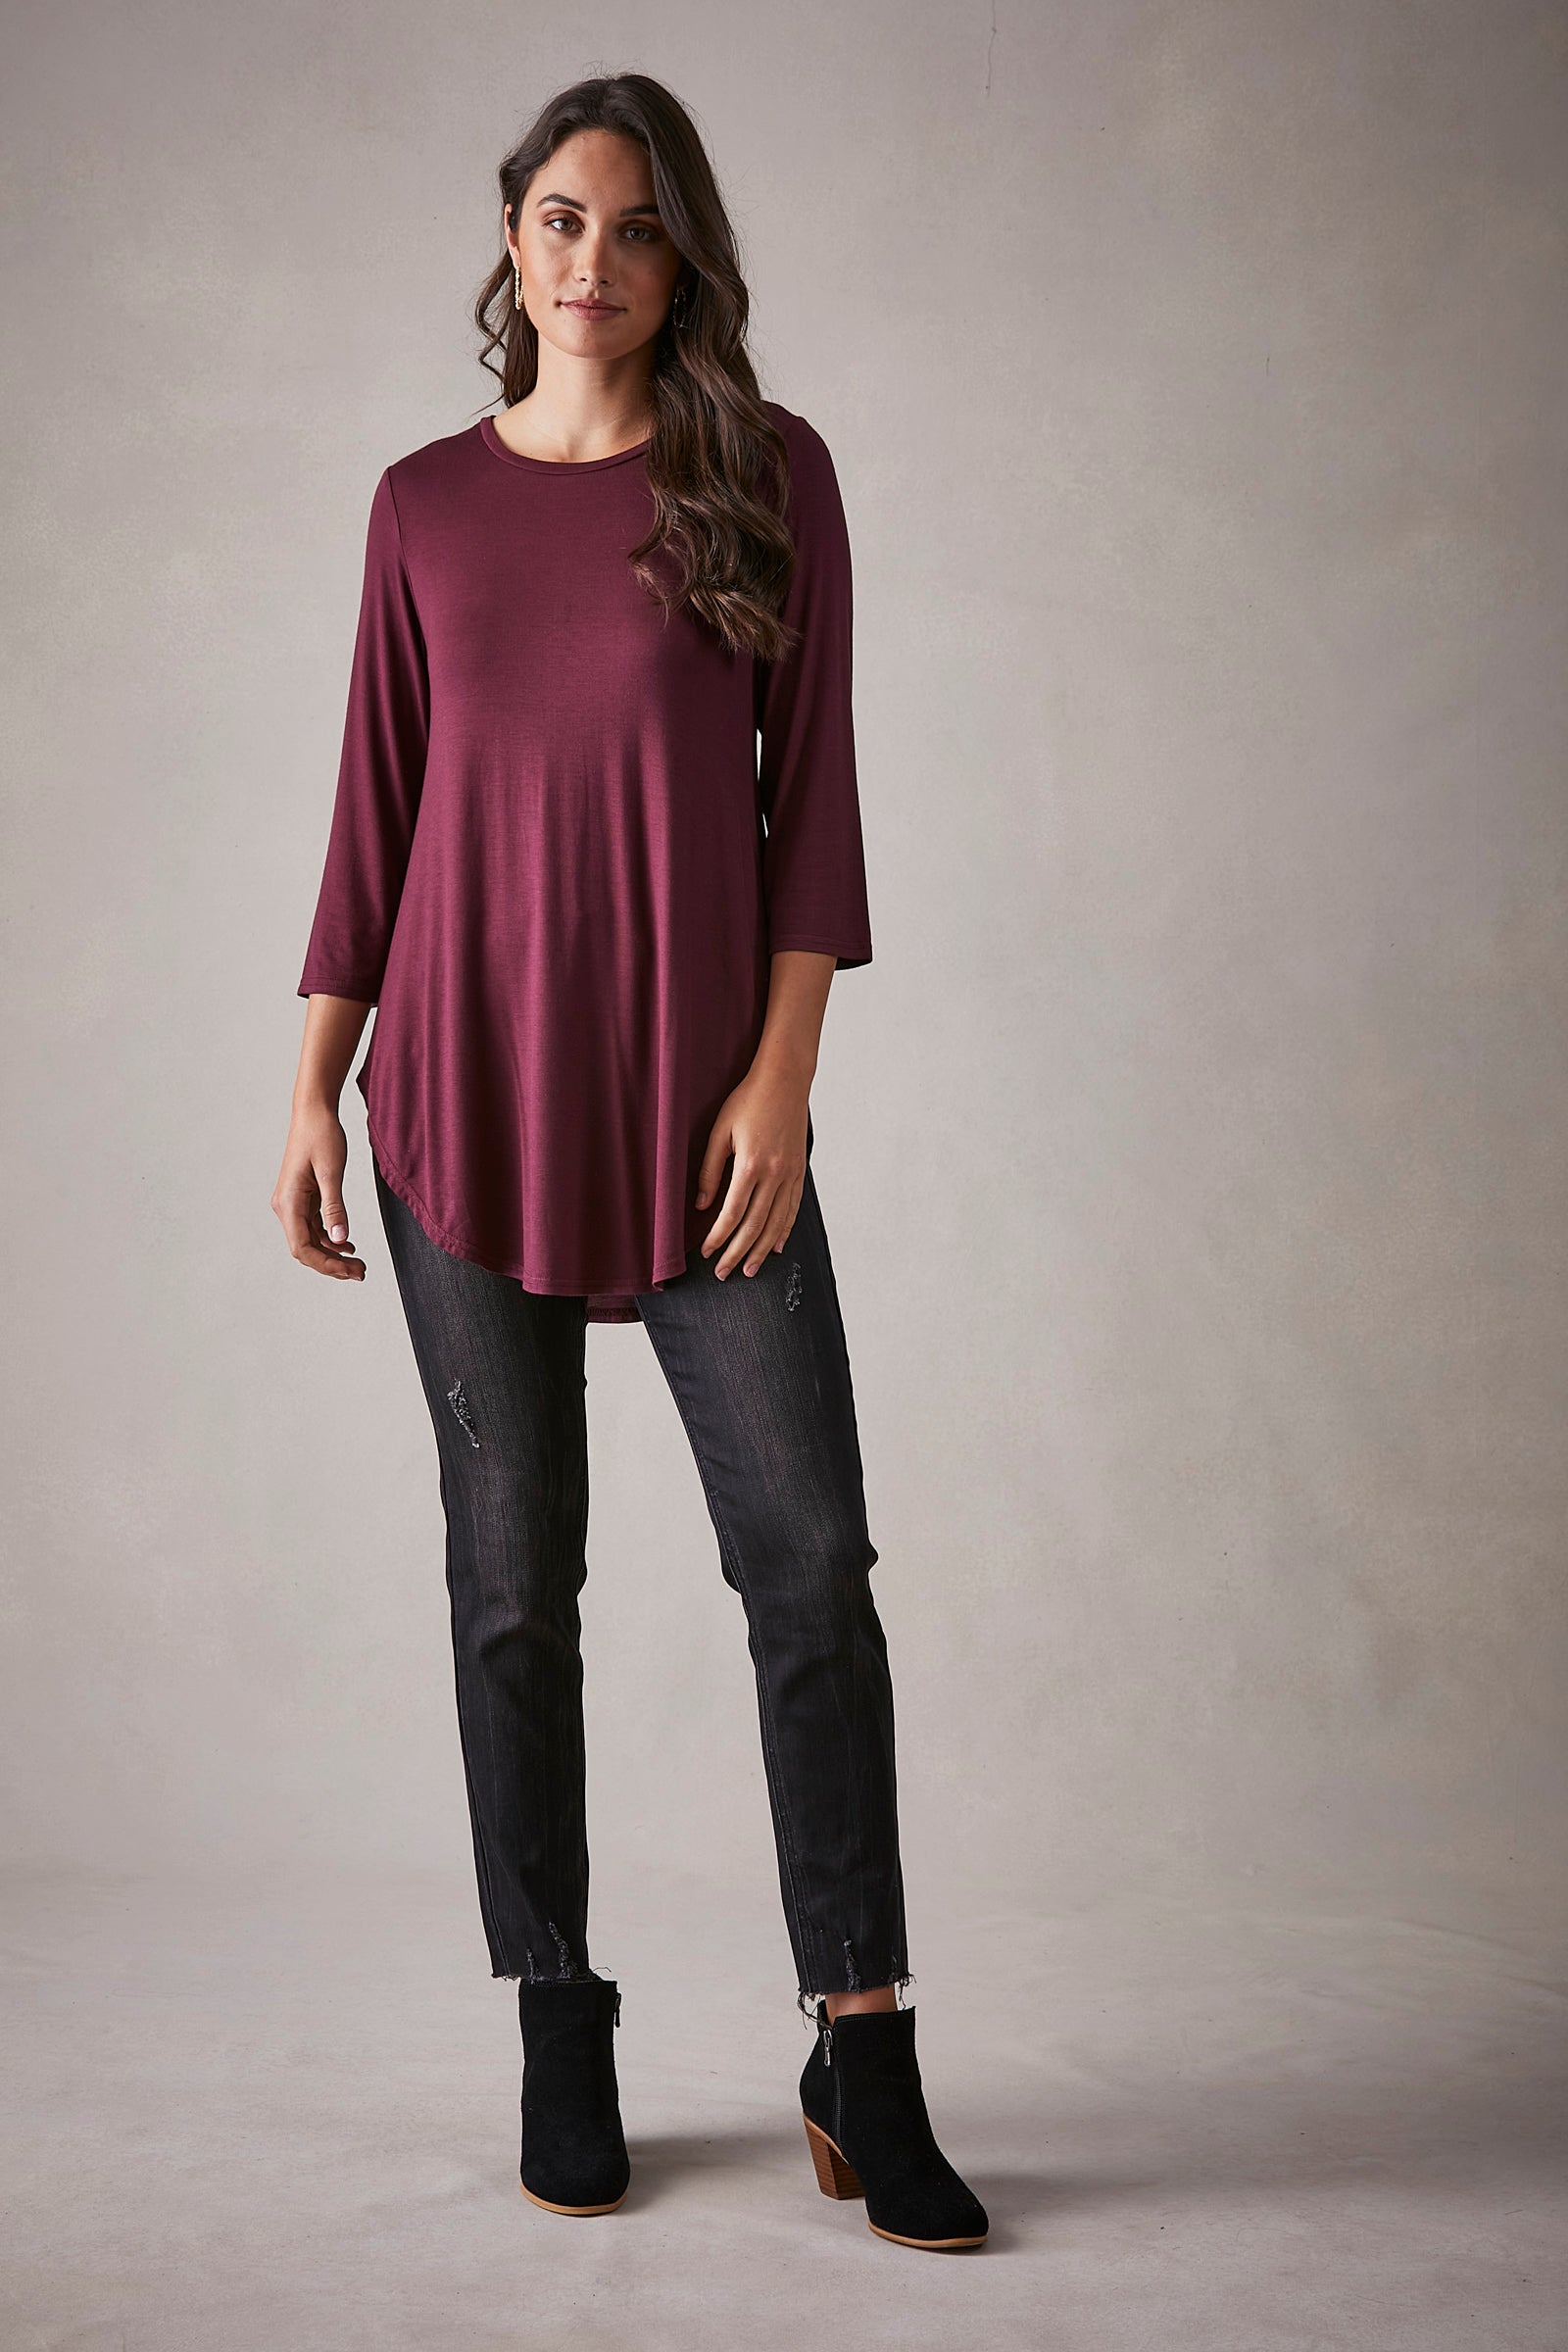 Belvoir Top - Mulberry - eb&ive Clothing - Top 3/4 Sleeve Jersey